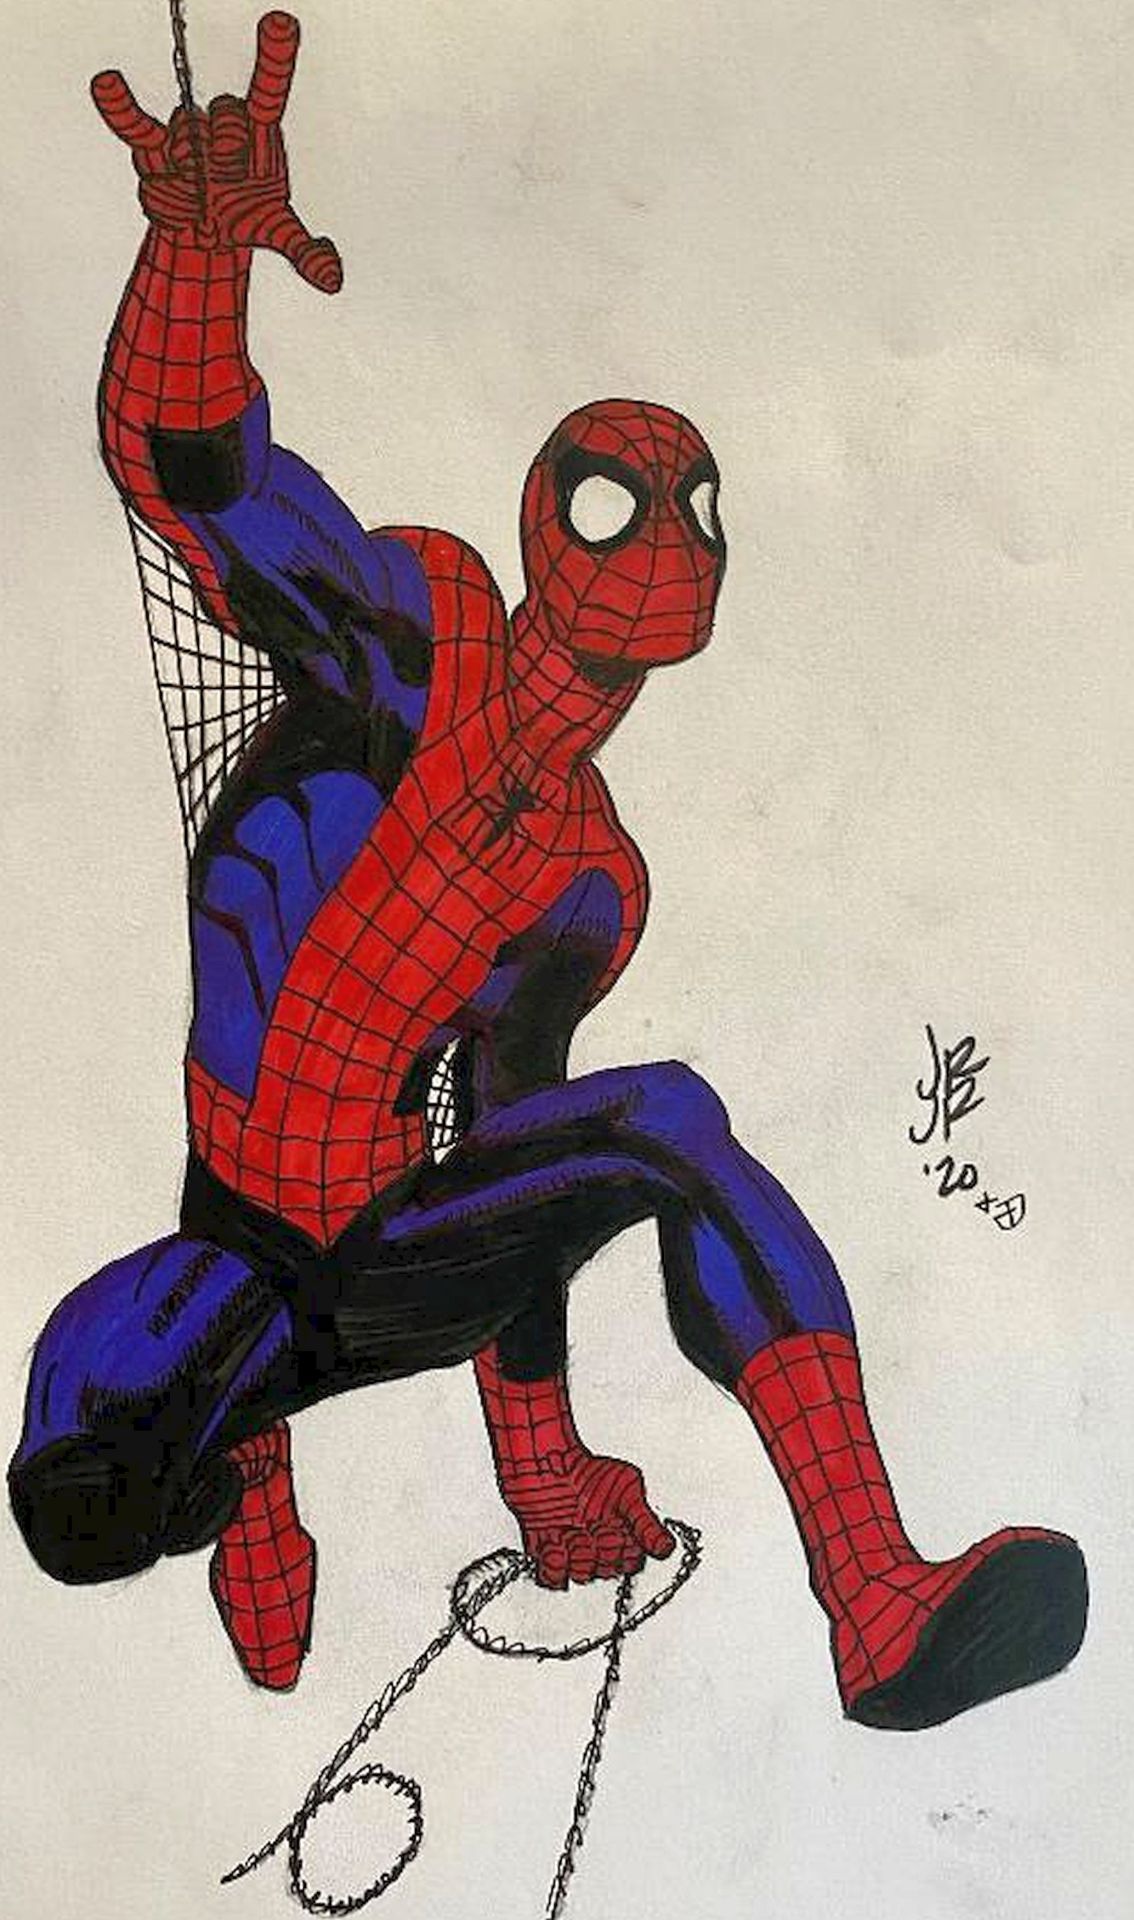 Spider-Man by John Romita, Jr.  with My Inks and Colors.